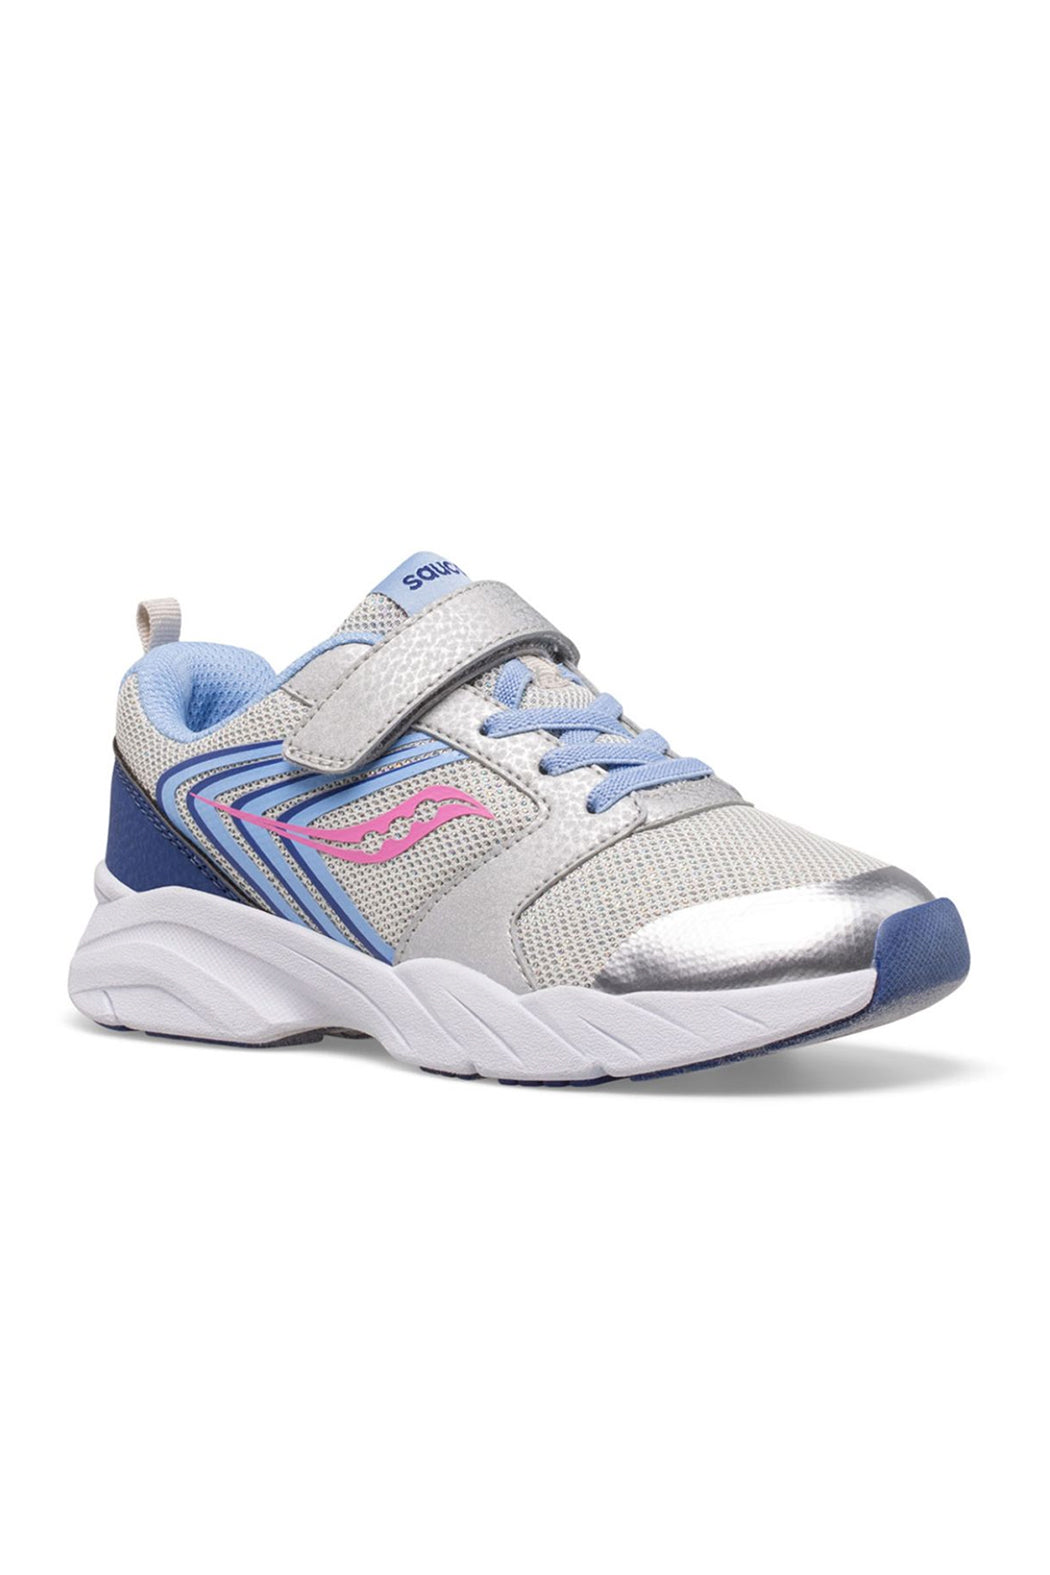 Saucony Wind FST A/C - Silver/Blue/Pink